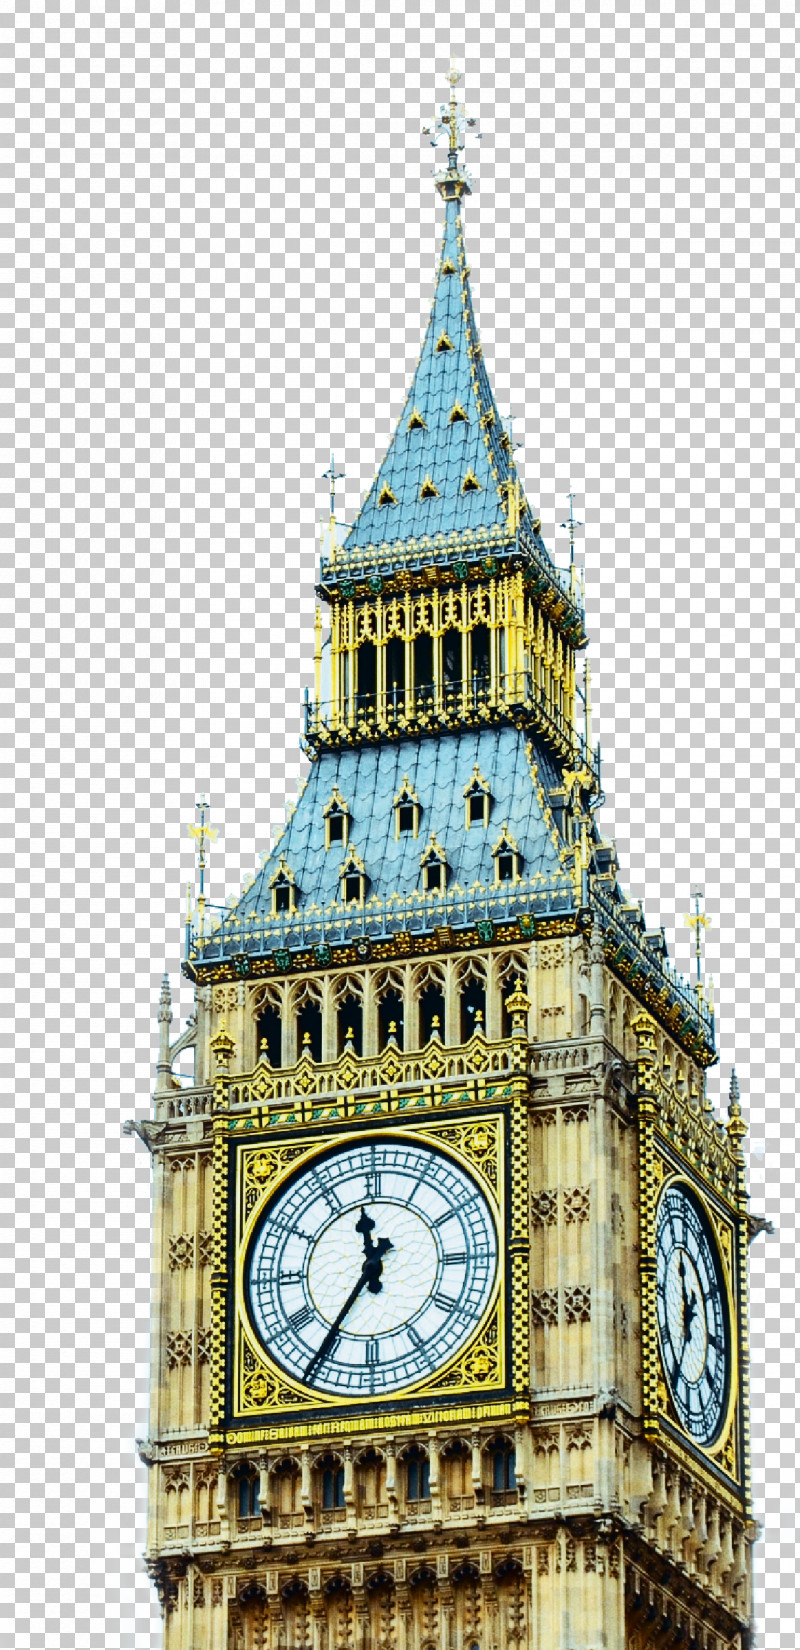 Clock Tower Landmark Tower Clock Architecture PNG, Clipart, Architecture, Bell Tower, Building, Classical Architecture, Clock Free PNG Download